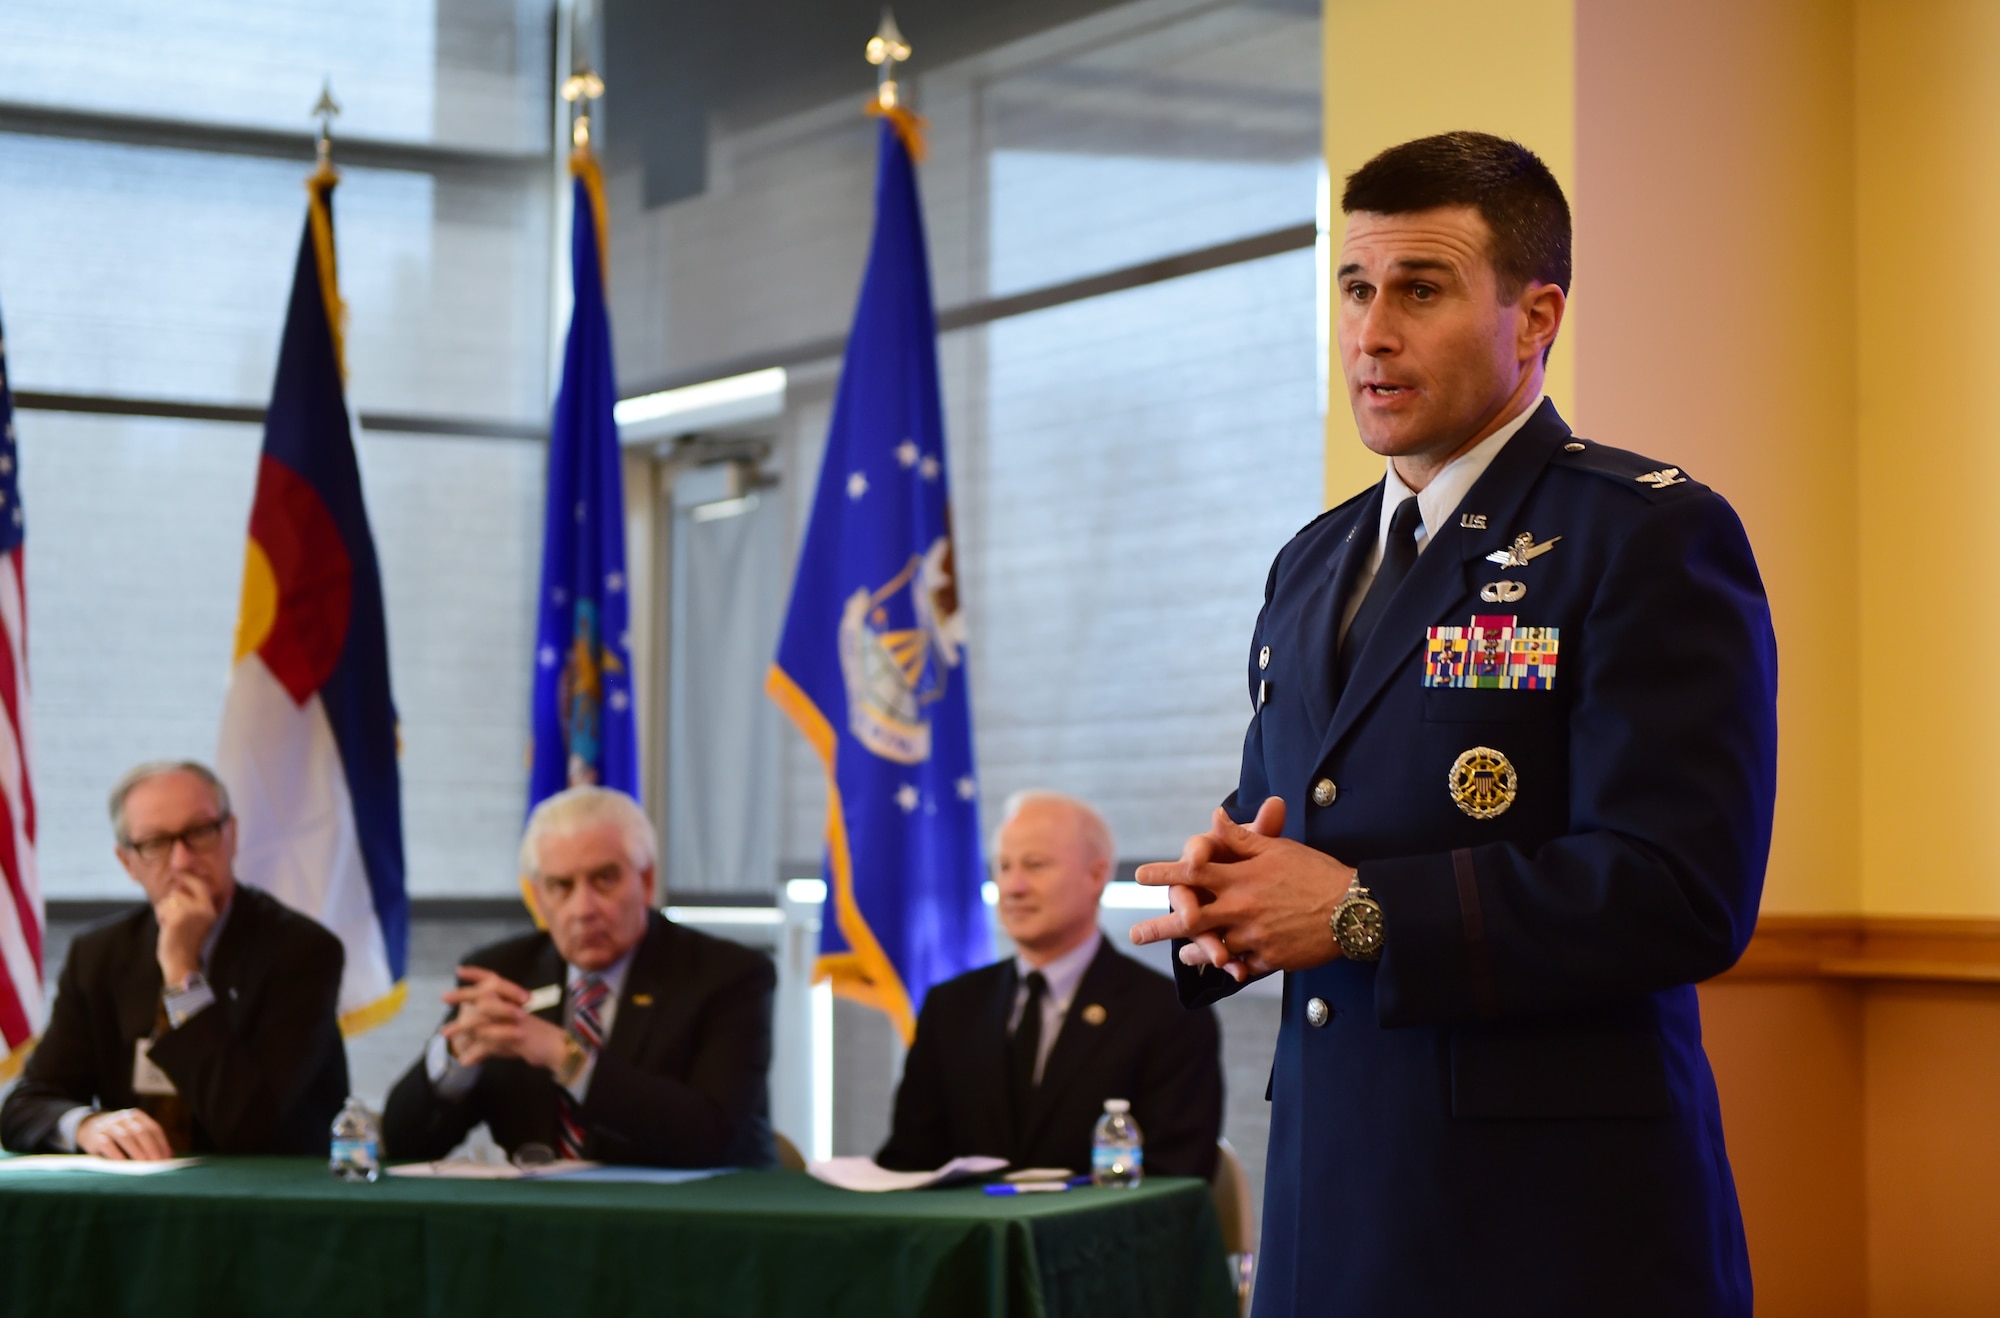 Col. John Wagner, 460th Space Wing commander, speaks to Arapahoe County citizens during a Readiness and Environmental Protection Integration program celebration March 9, 2016, at the Arapahoe Center Point Plaza in Aurora, Colo. The event marked the day that the Trust for Public Land and Buckley Air Force Base announced that 124 acres adjacent to the base have been permanently protected from development. (U.S. Air Force photo by Senior Airman Racheal E. Watson/Released)